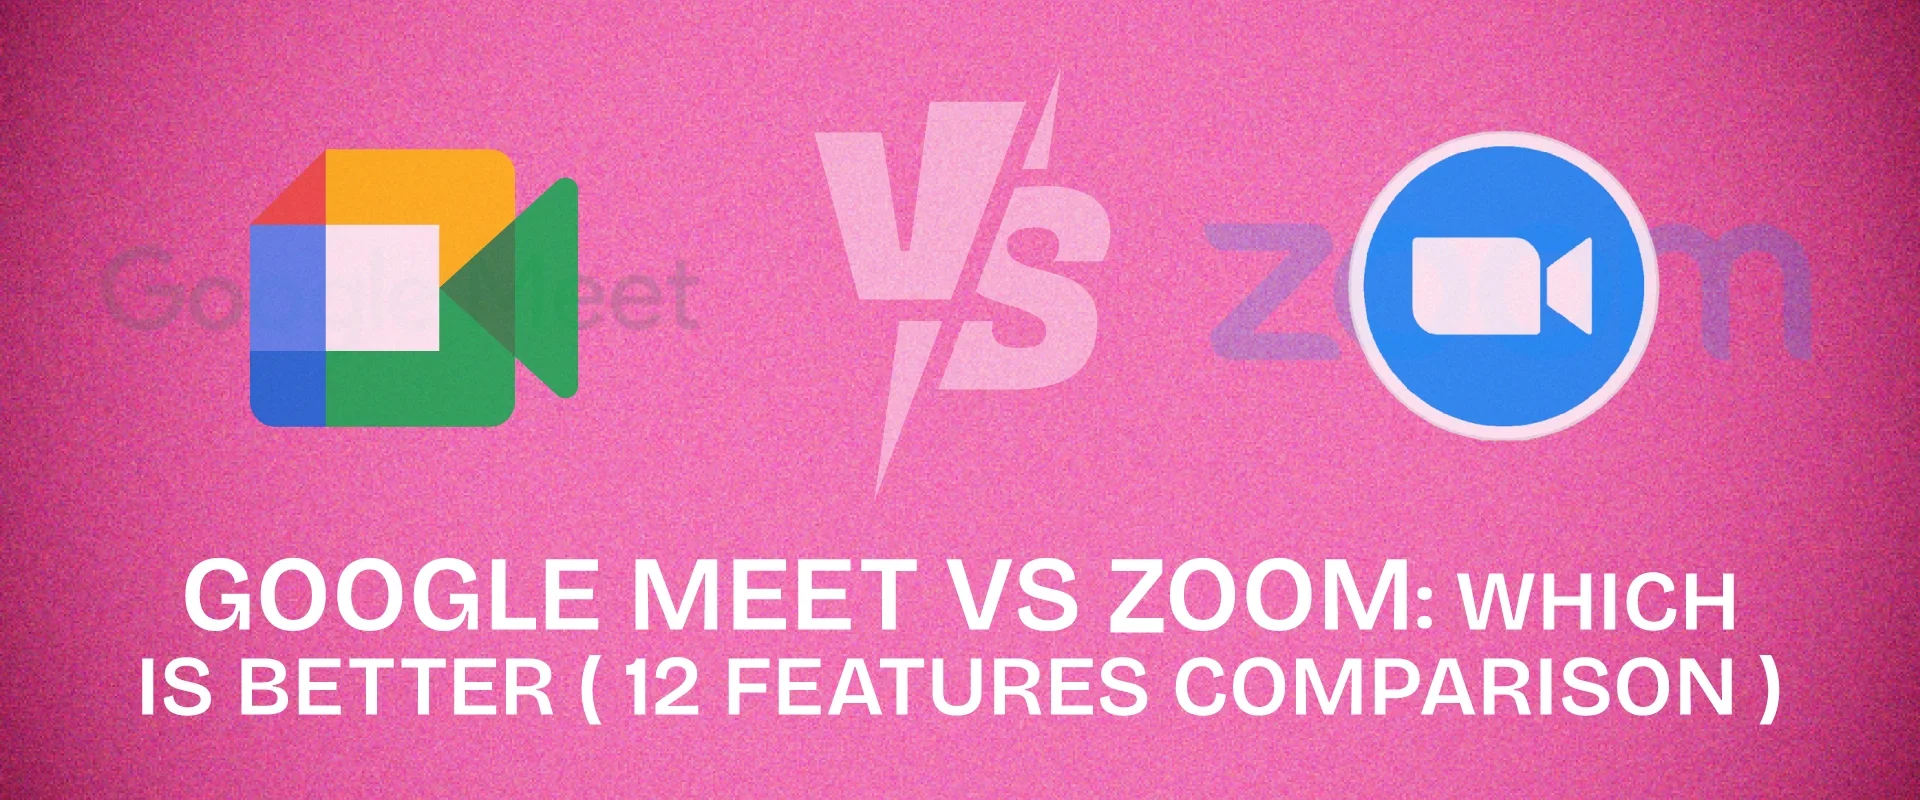 Google Meet vs Zoom: Comparing 12 Features to Pick the Better Platform